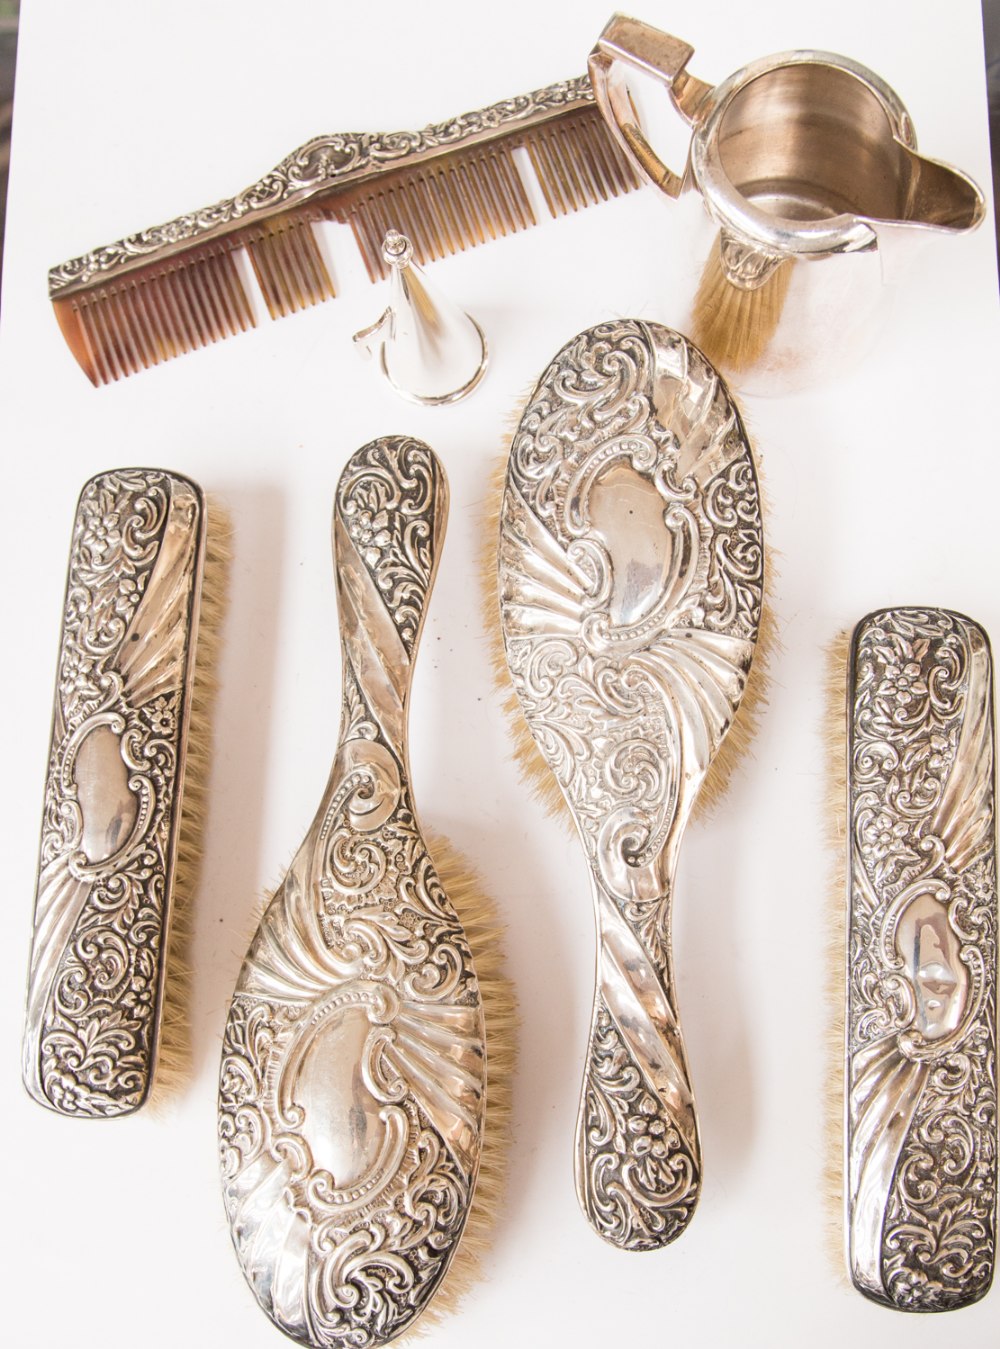 Silver backed brushes (4) and comb; together with a plate jug and candle snuffer